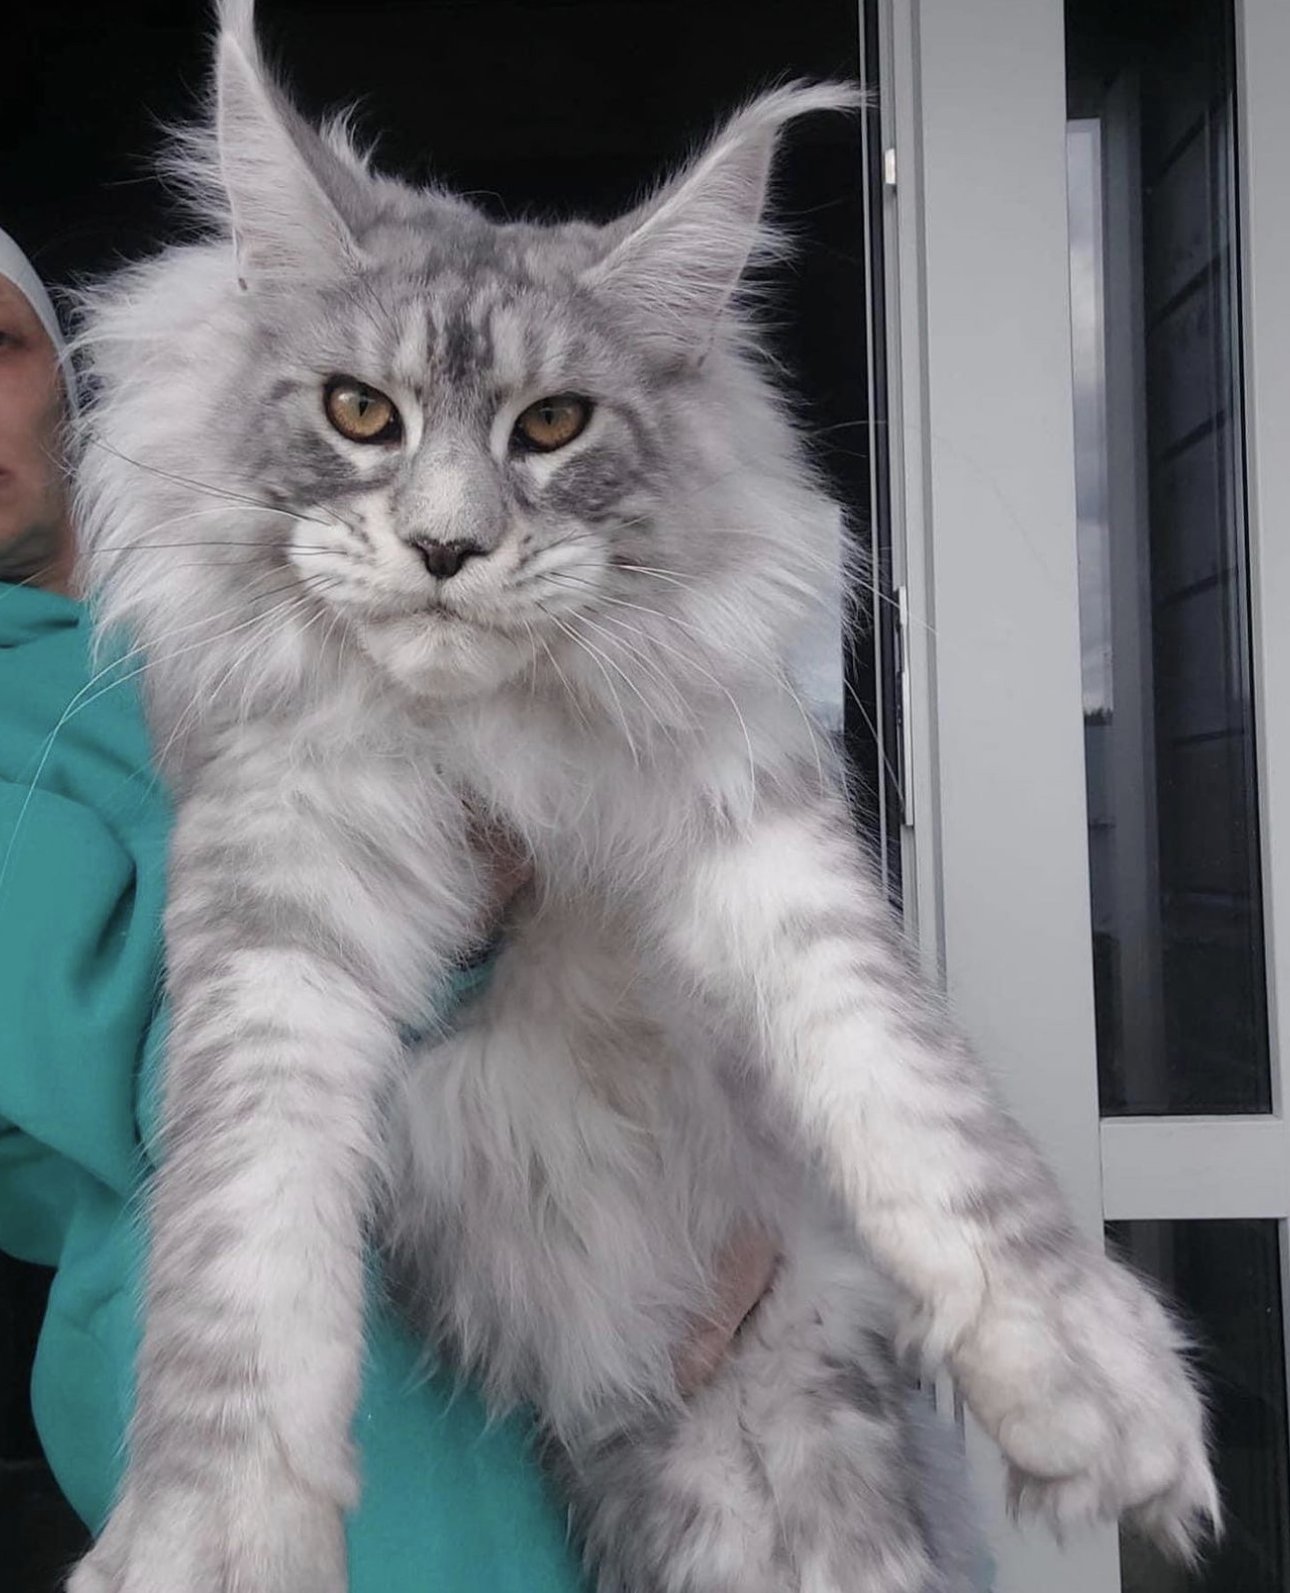 Giant Maine Coon Size Cats for Sale | Maine coon price